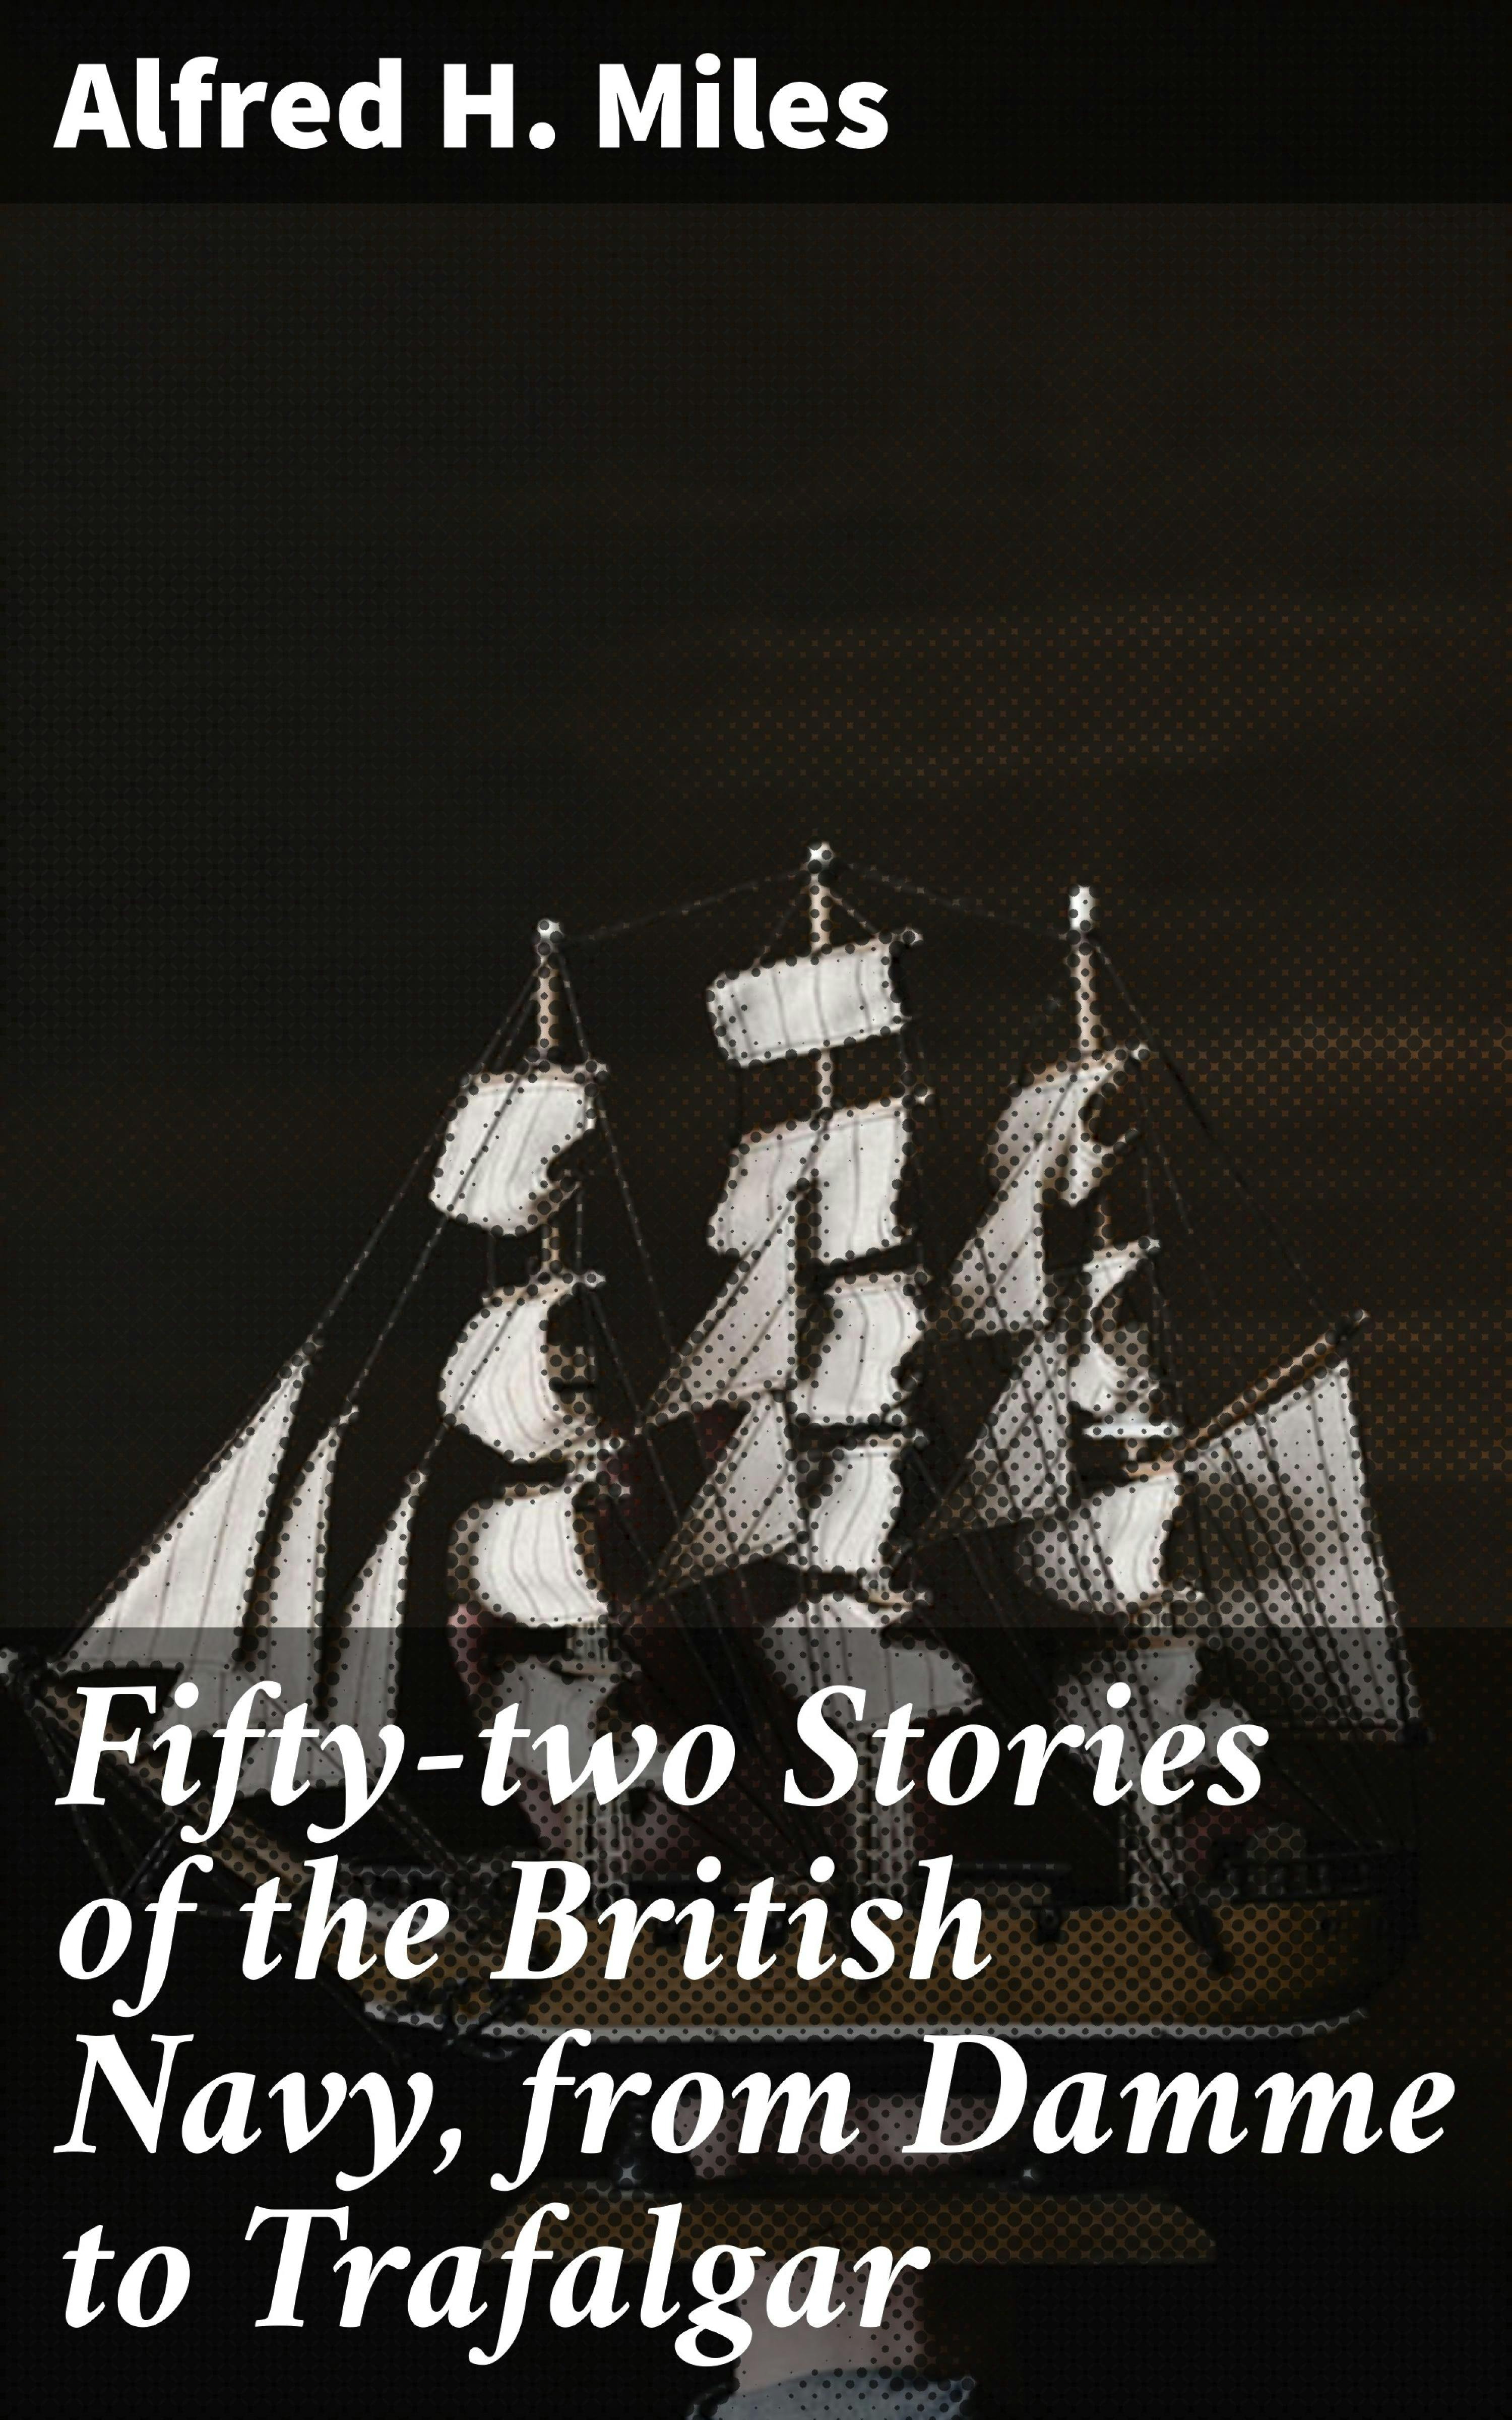 Fifty-two Stories of the British Navy, from Damme to Trafalgar - Alfred H. Miles